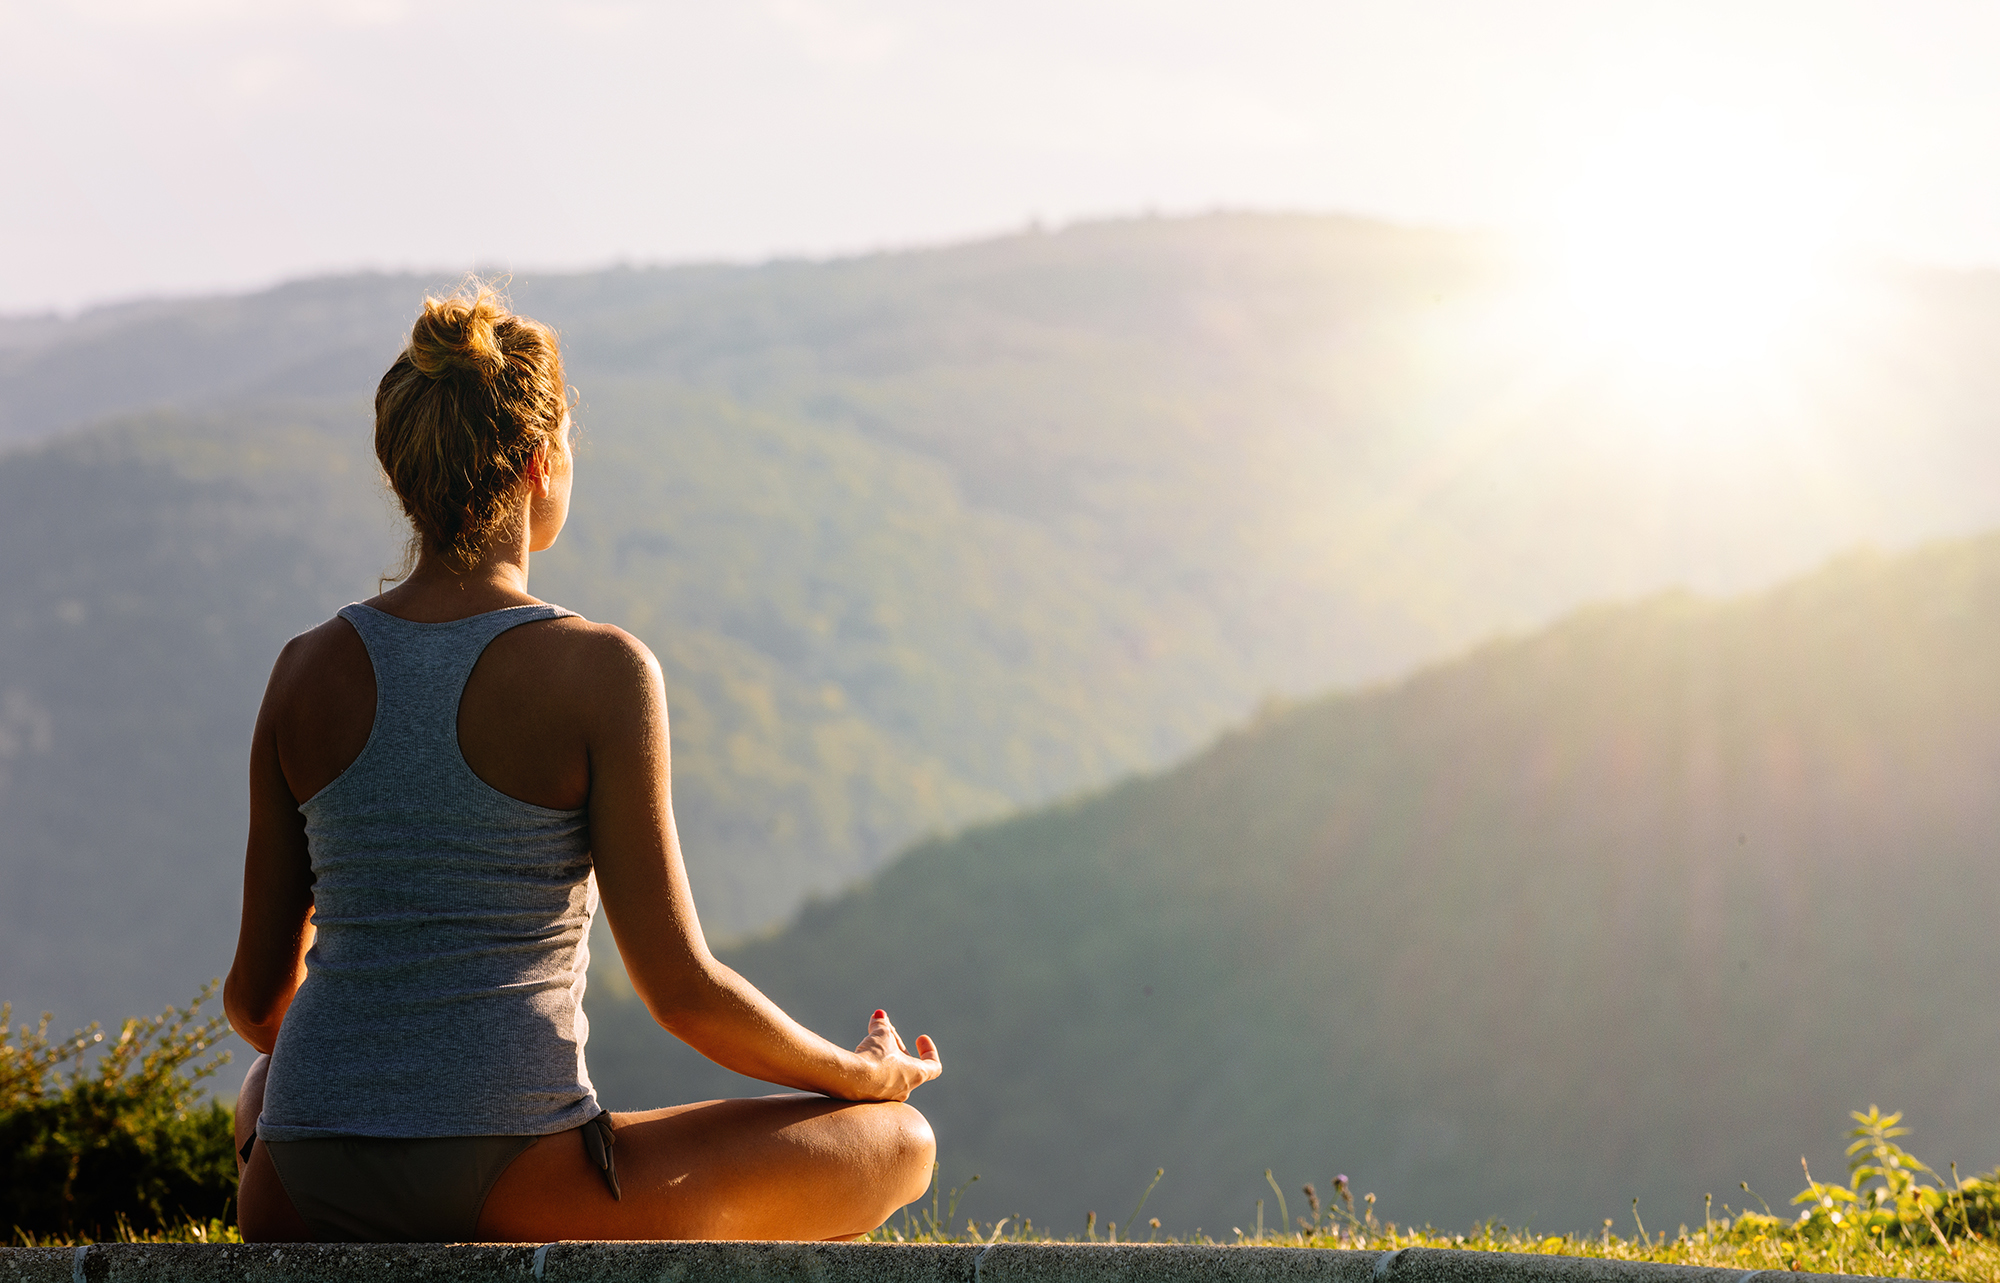 Meditation is not only a self-improvement project, it’s a lifestyle choice. Join Gillian McMichael, a certified wellness coach and meditation coach, at her next meditation retreat